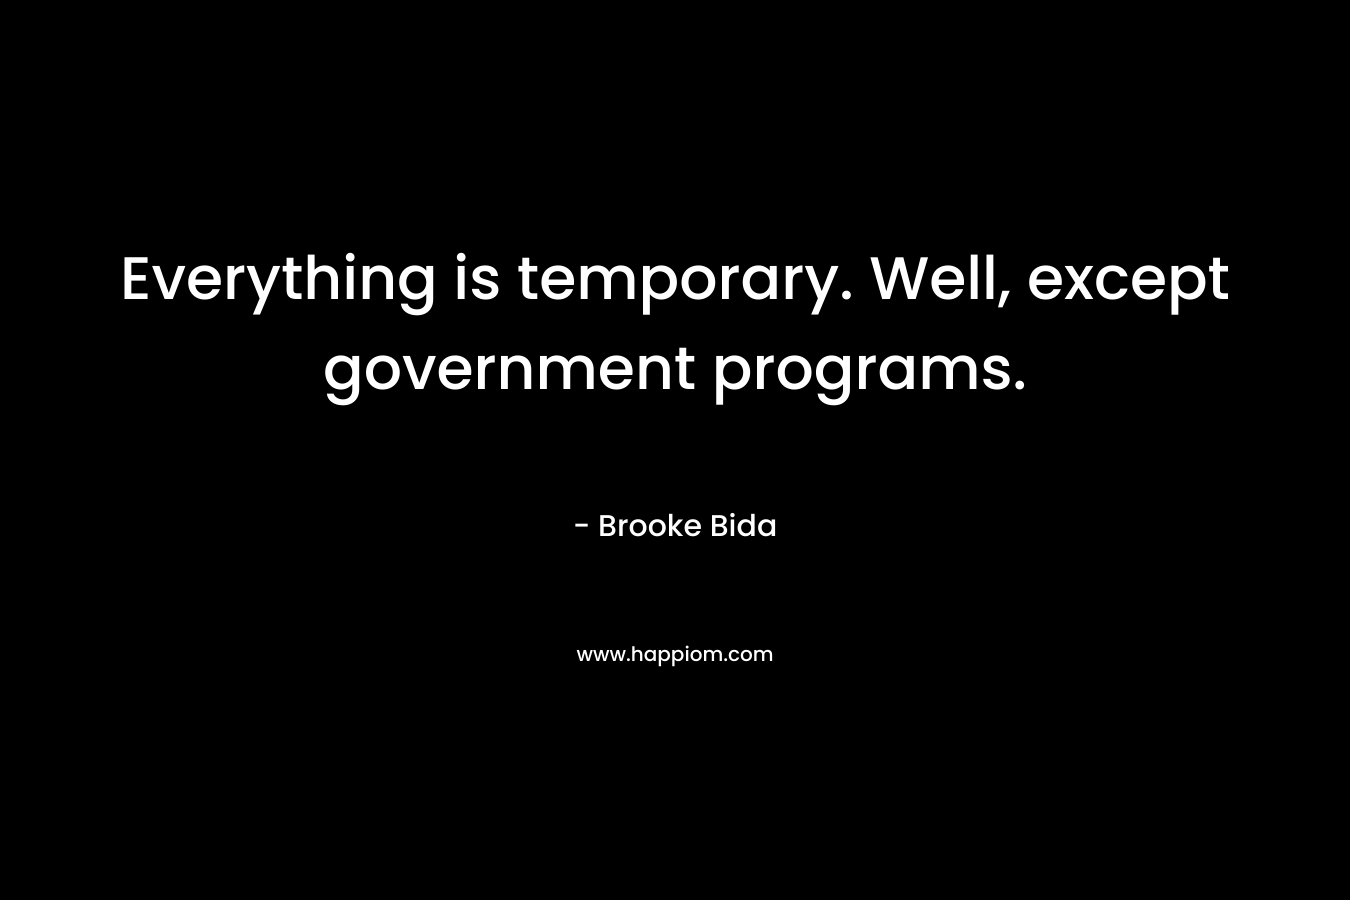 Everything is temporary. Well, except government programs.